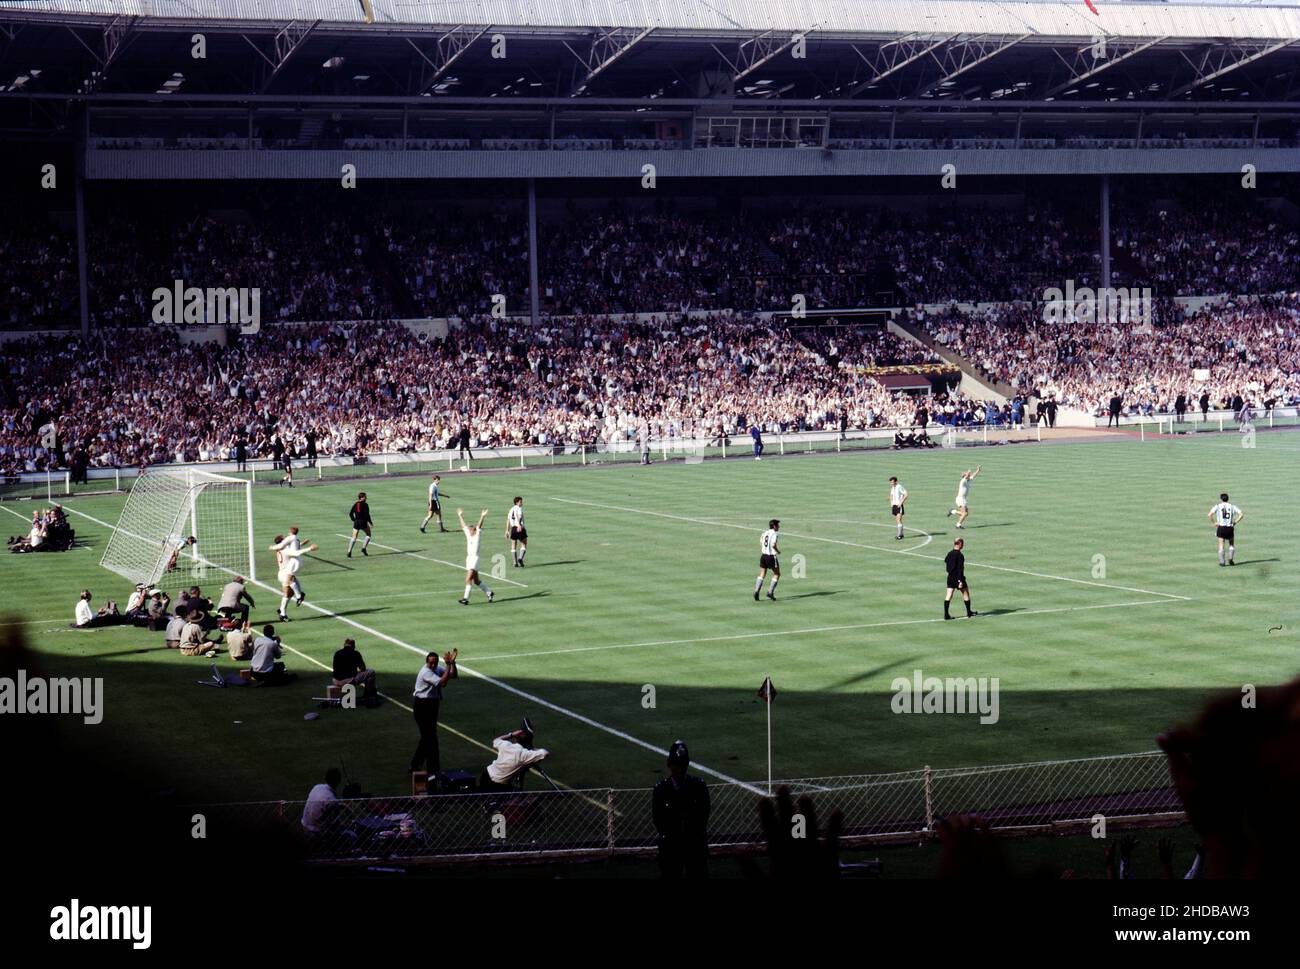 World Cup Finals 1966 Fan Amateur Photos from the stands 23rd July 1966 Querter Final England versus Argentina  England celebrate Geoff Hurst's 77th minute winner  Photo by Tony Henshaw Archive Stock Photo